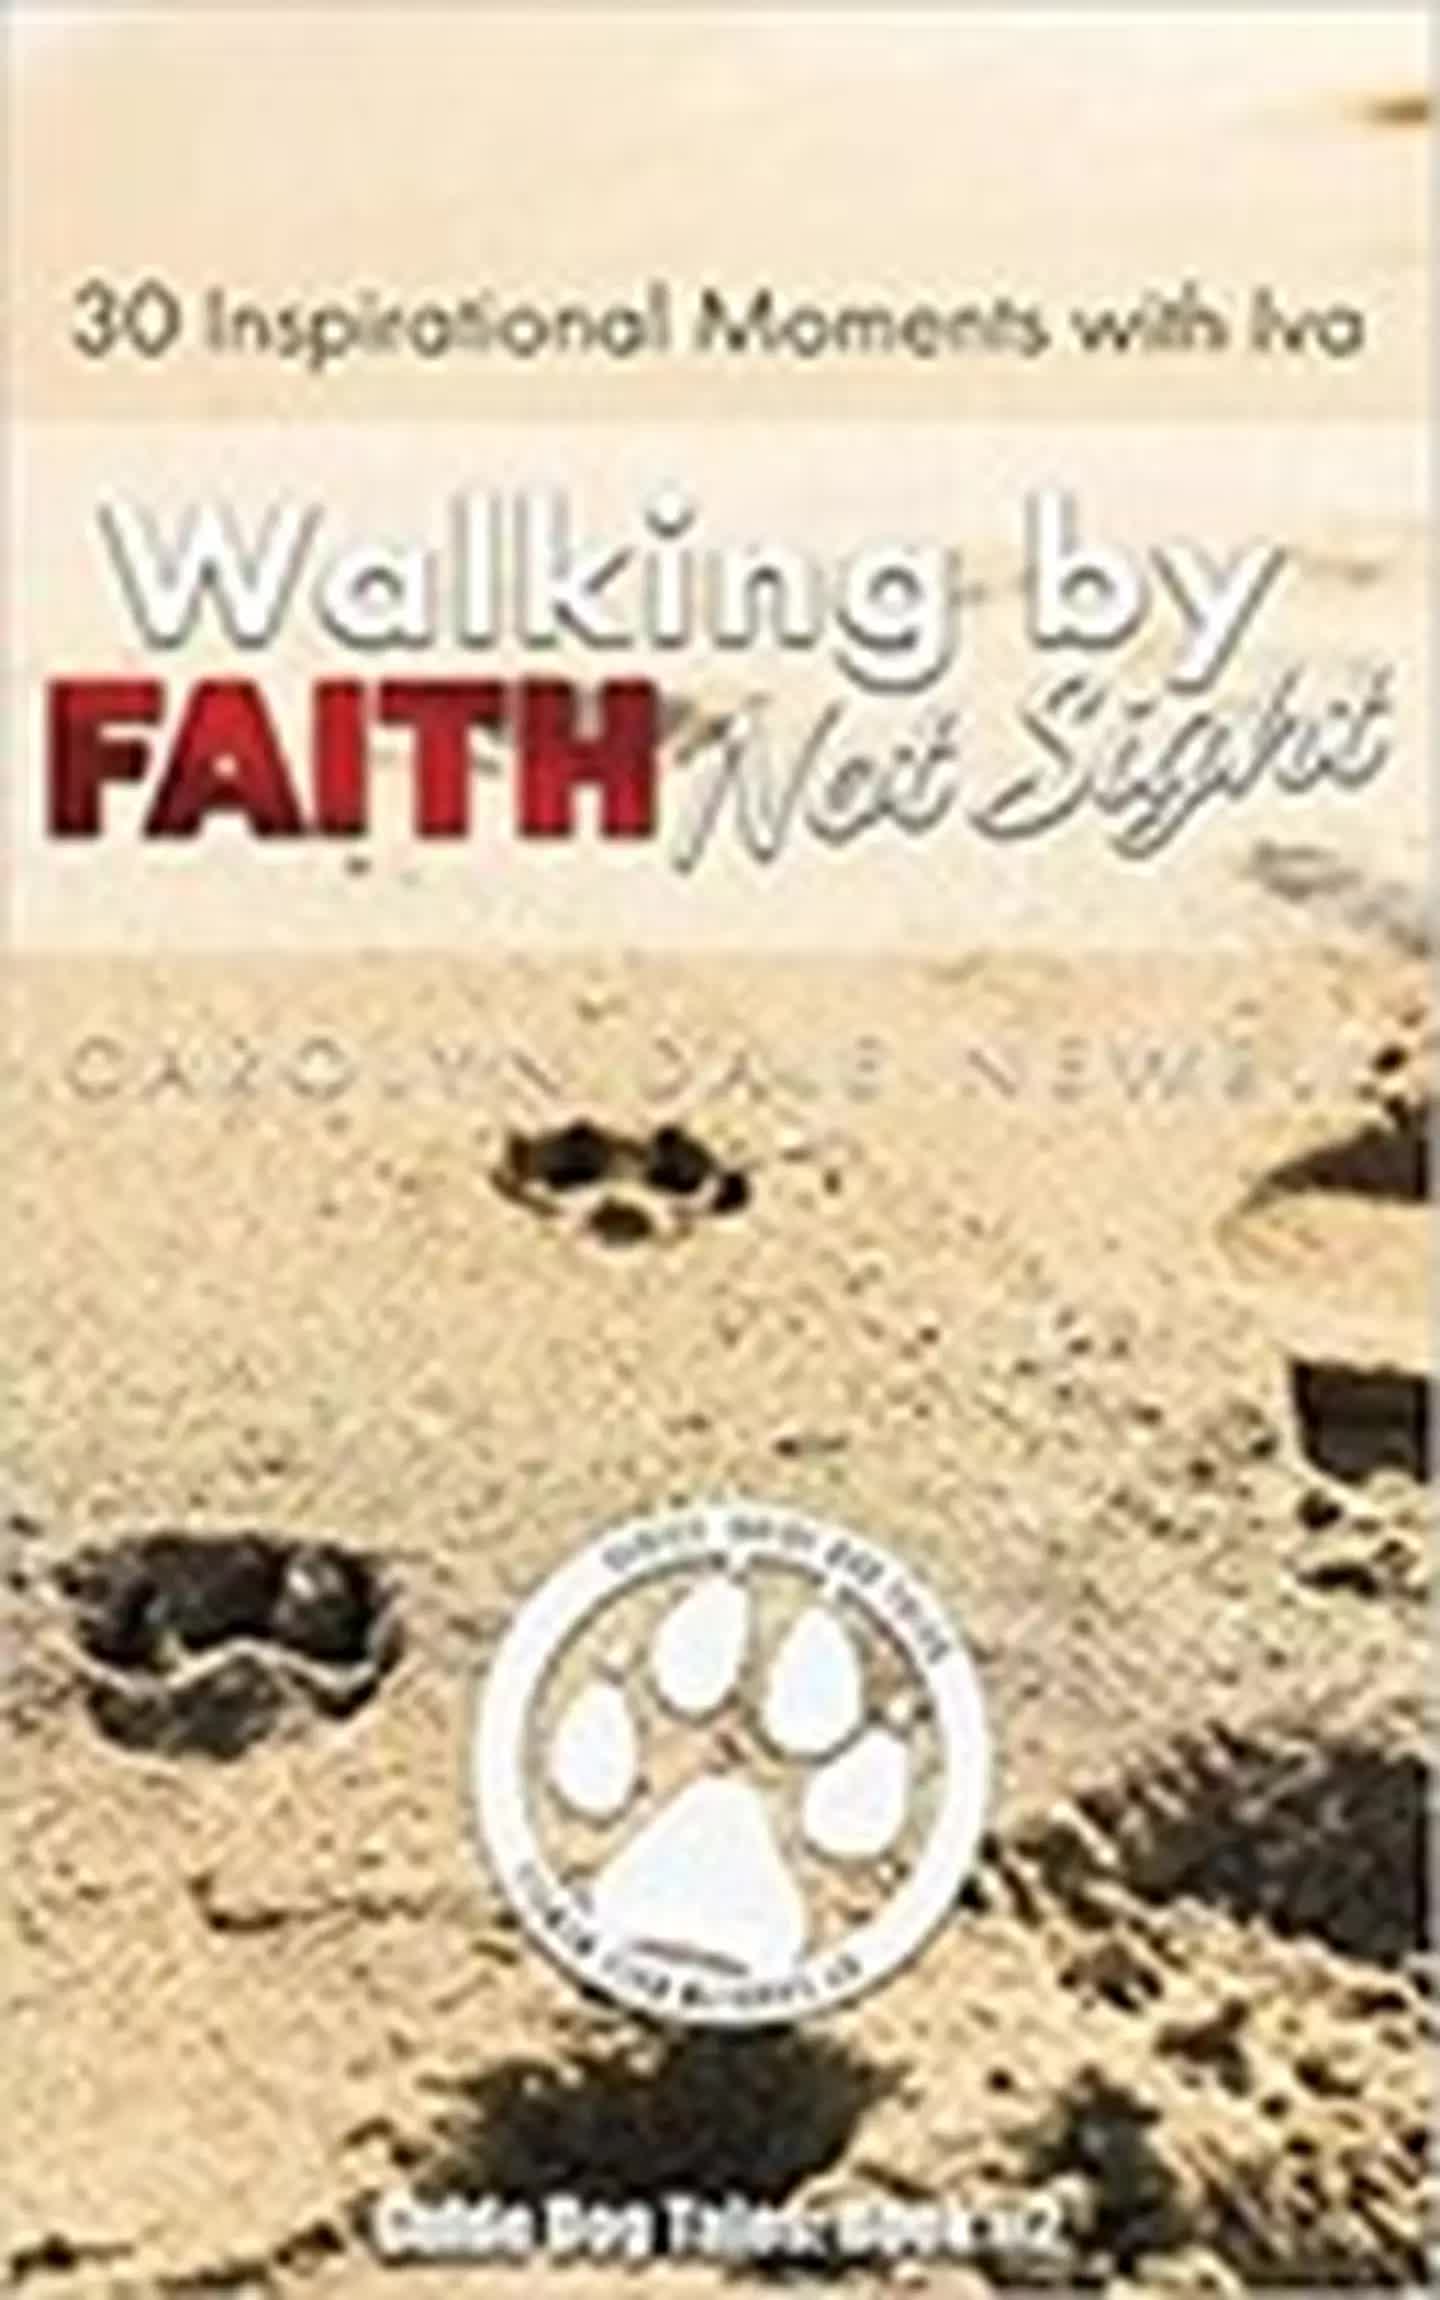 carolyn dale newell walking by faith not sight arise daily